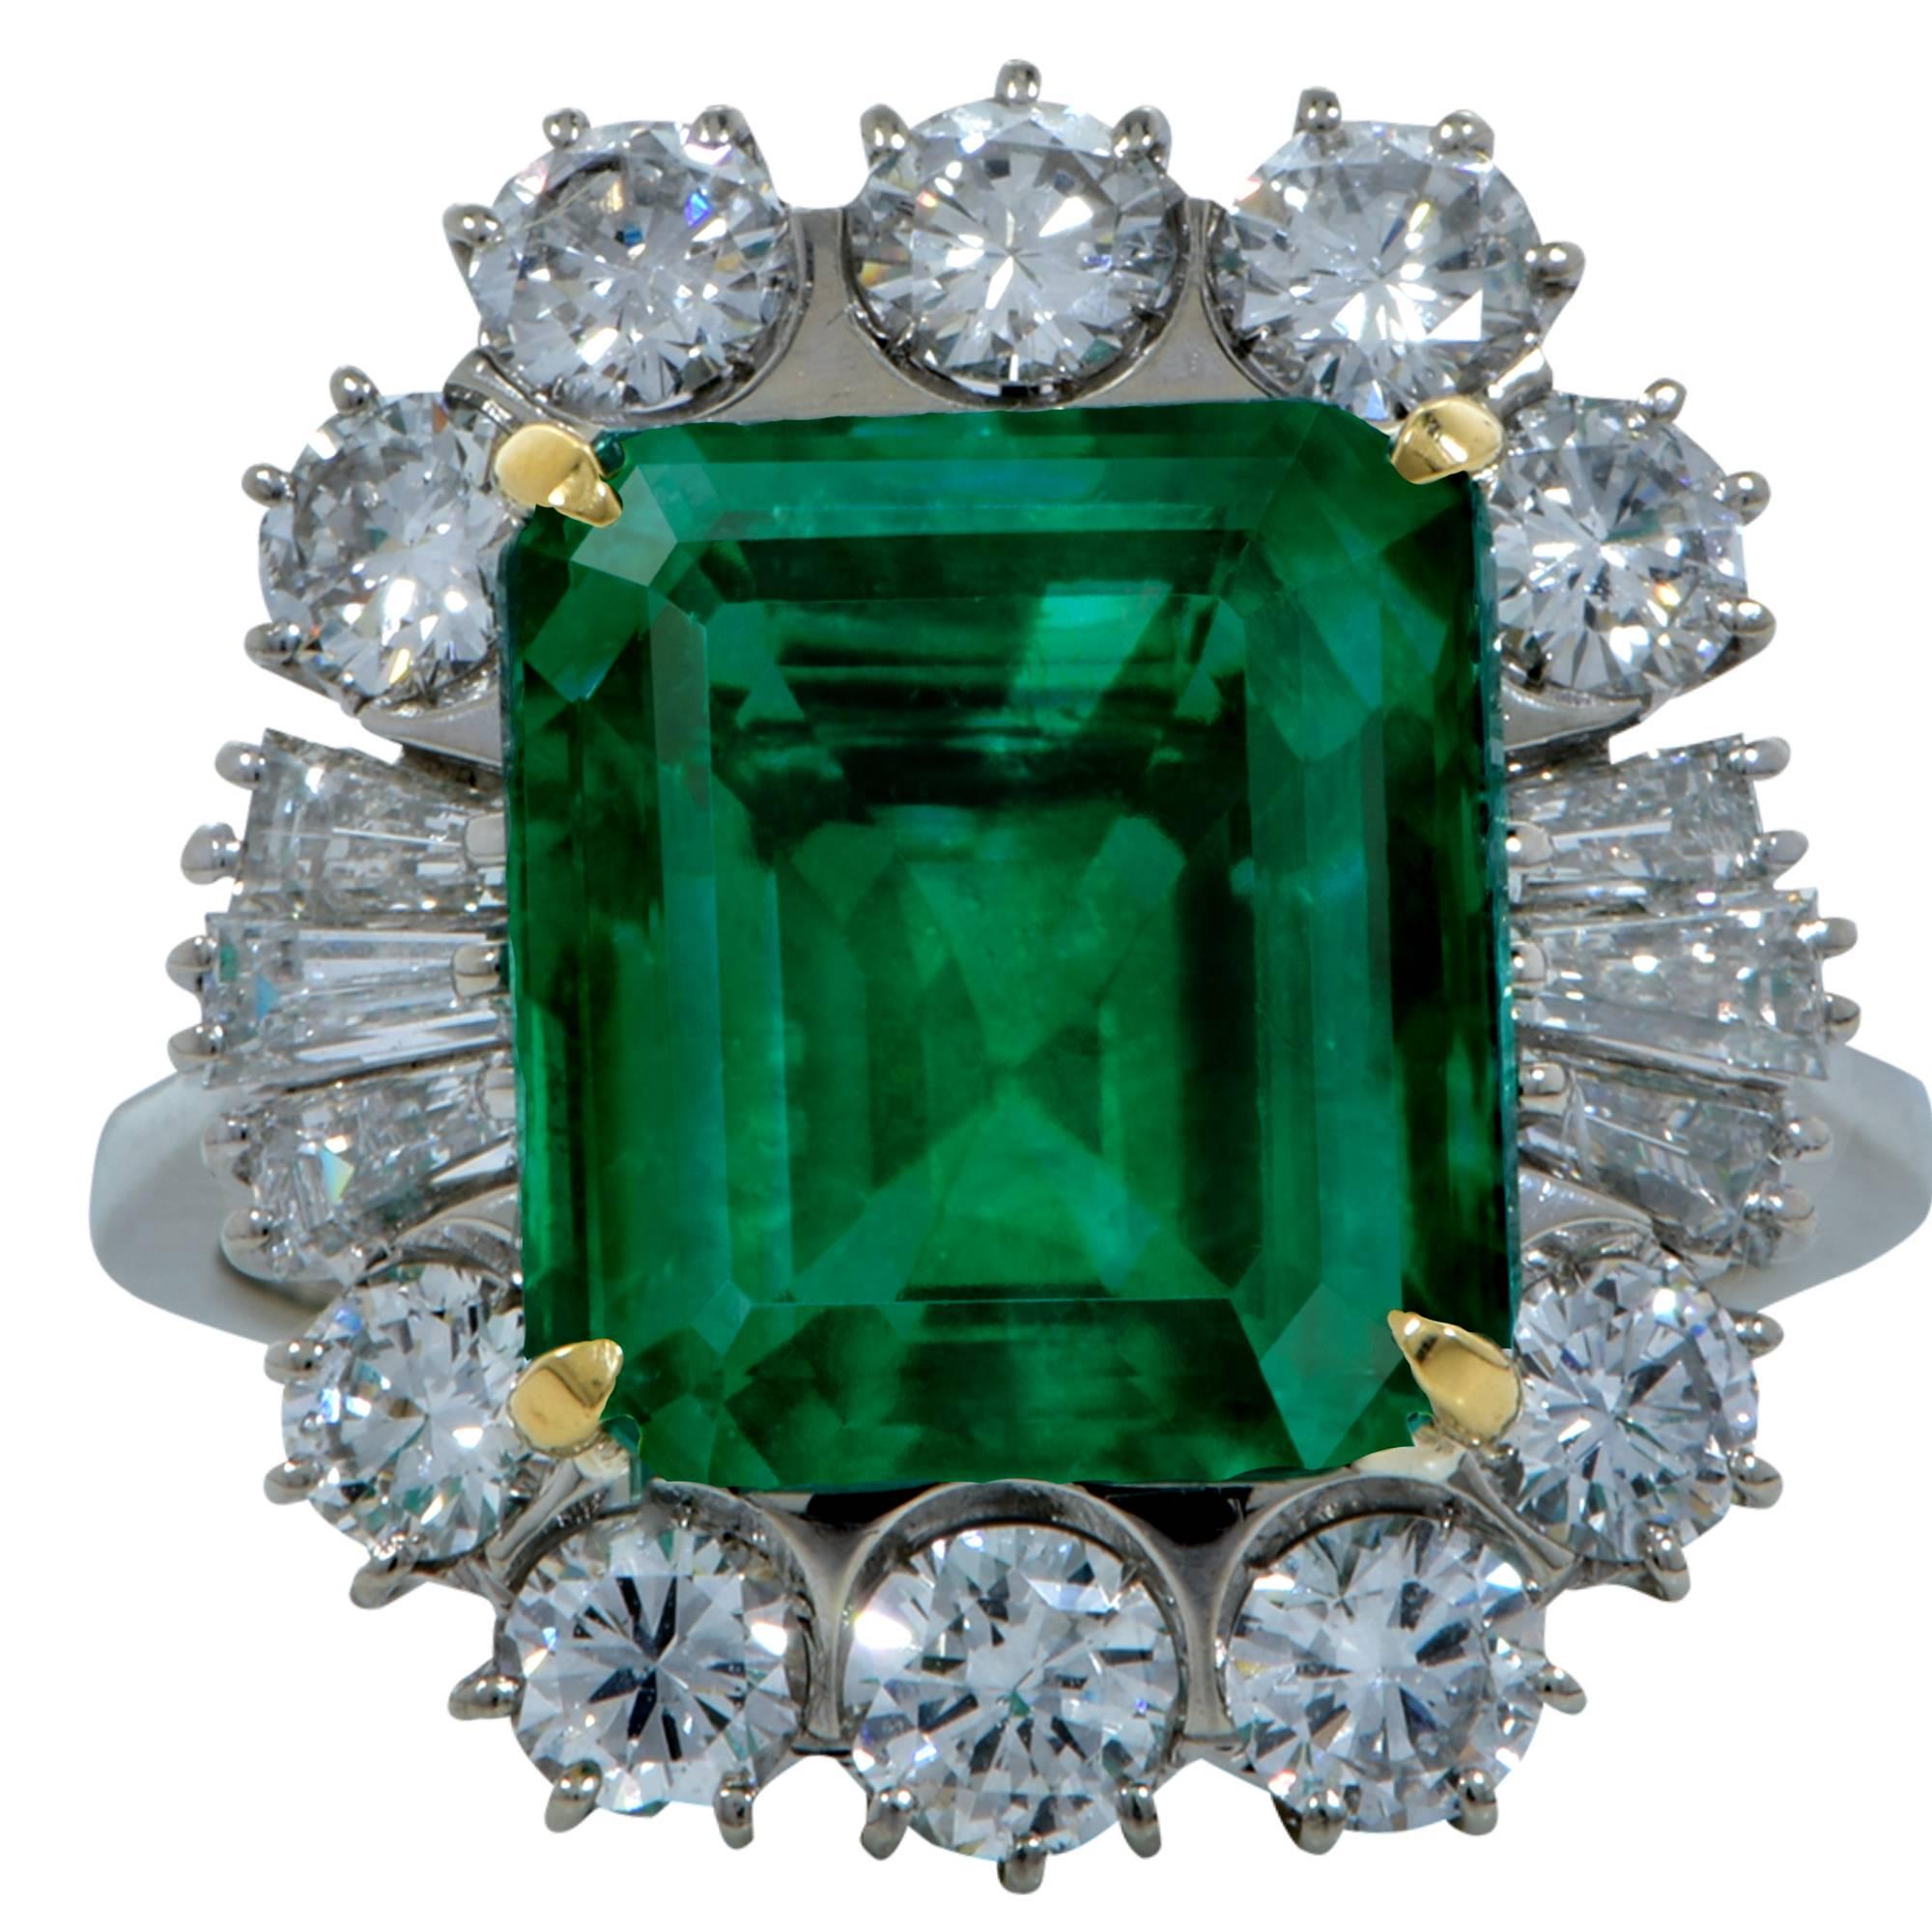 This 18k White gold ring showcases a spectacular emerald cut emerald weighing 6.59cts that is certified by the GIA with a Colombian provenance. The emerald has a very vibrant verdant green presence, sought after by many emerald connoisseurs.